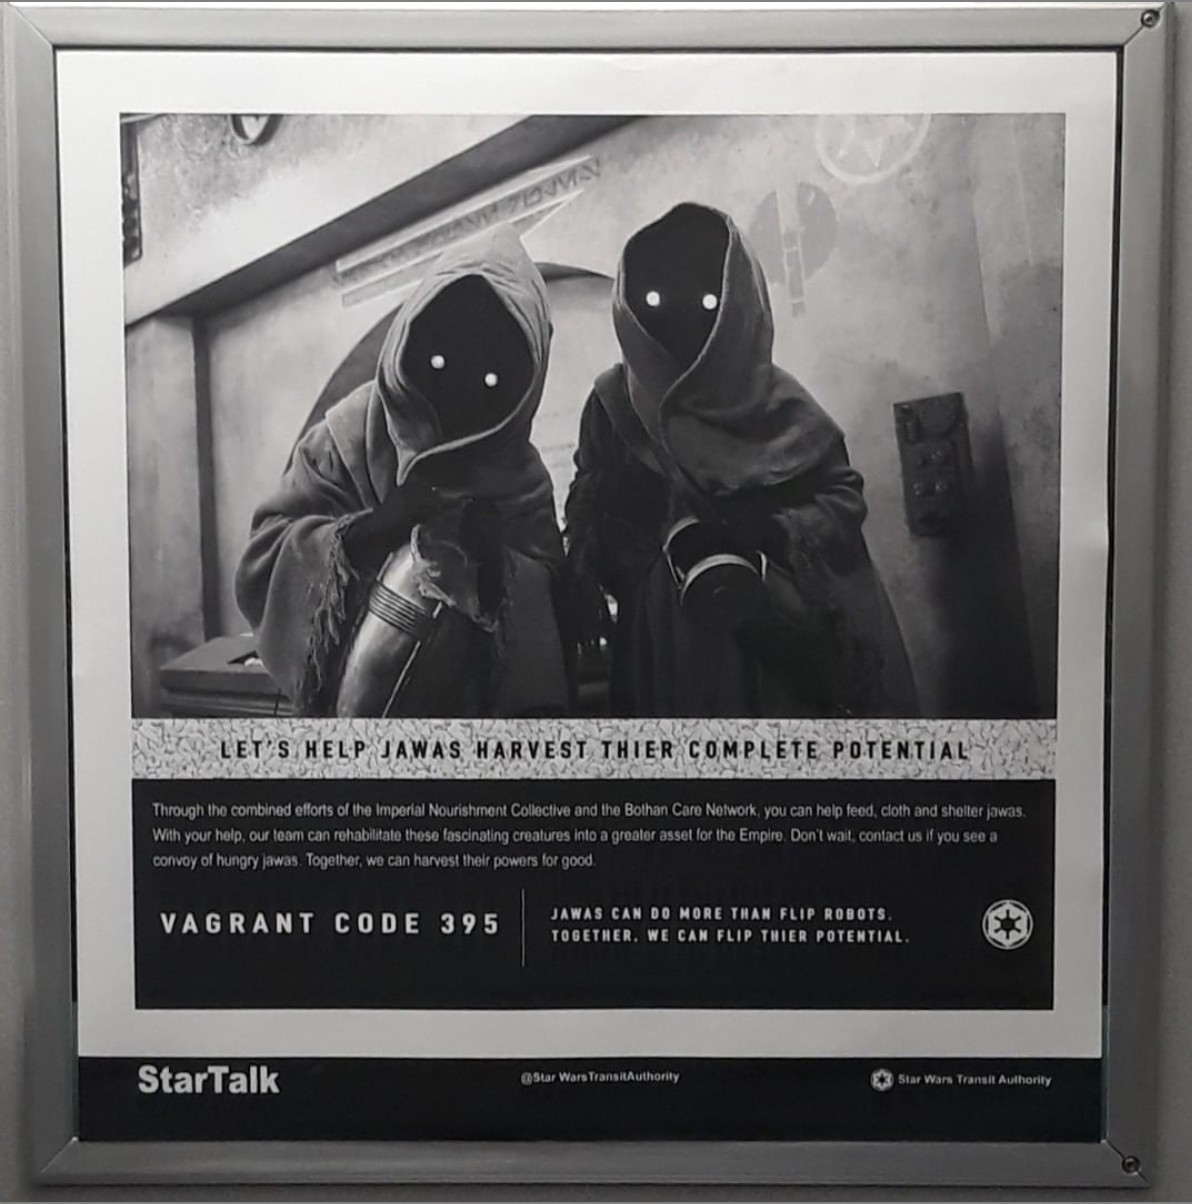 A poster inside of an MTA subway car of two creatures wearing capes from the Star Wars films.